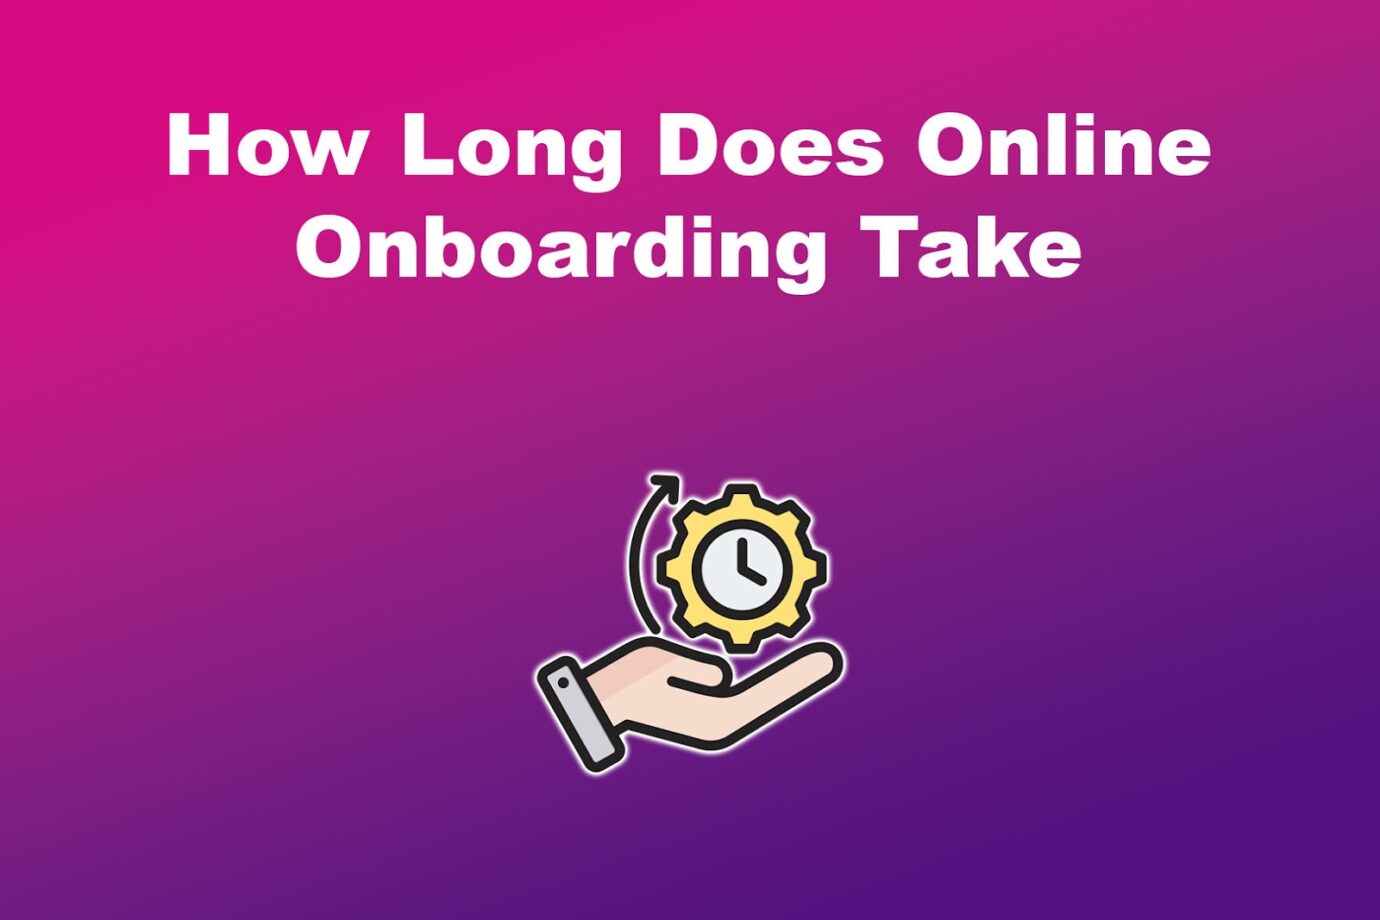 How Long Does Online Onboarding Take